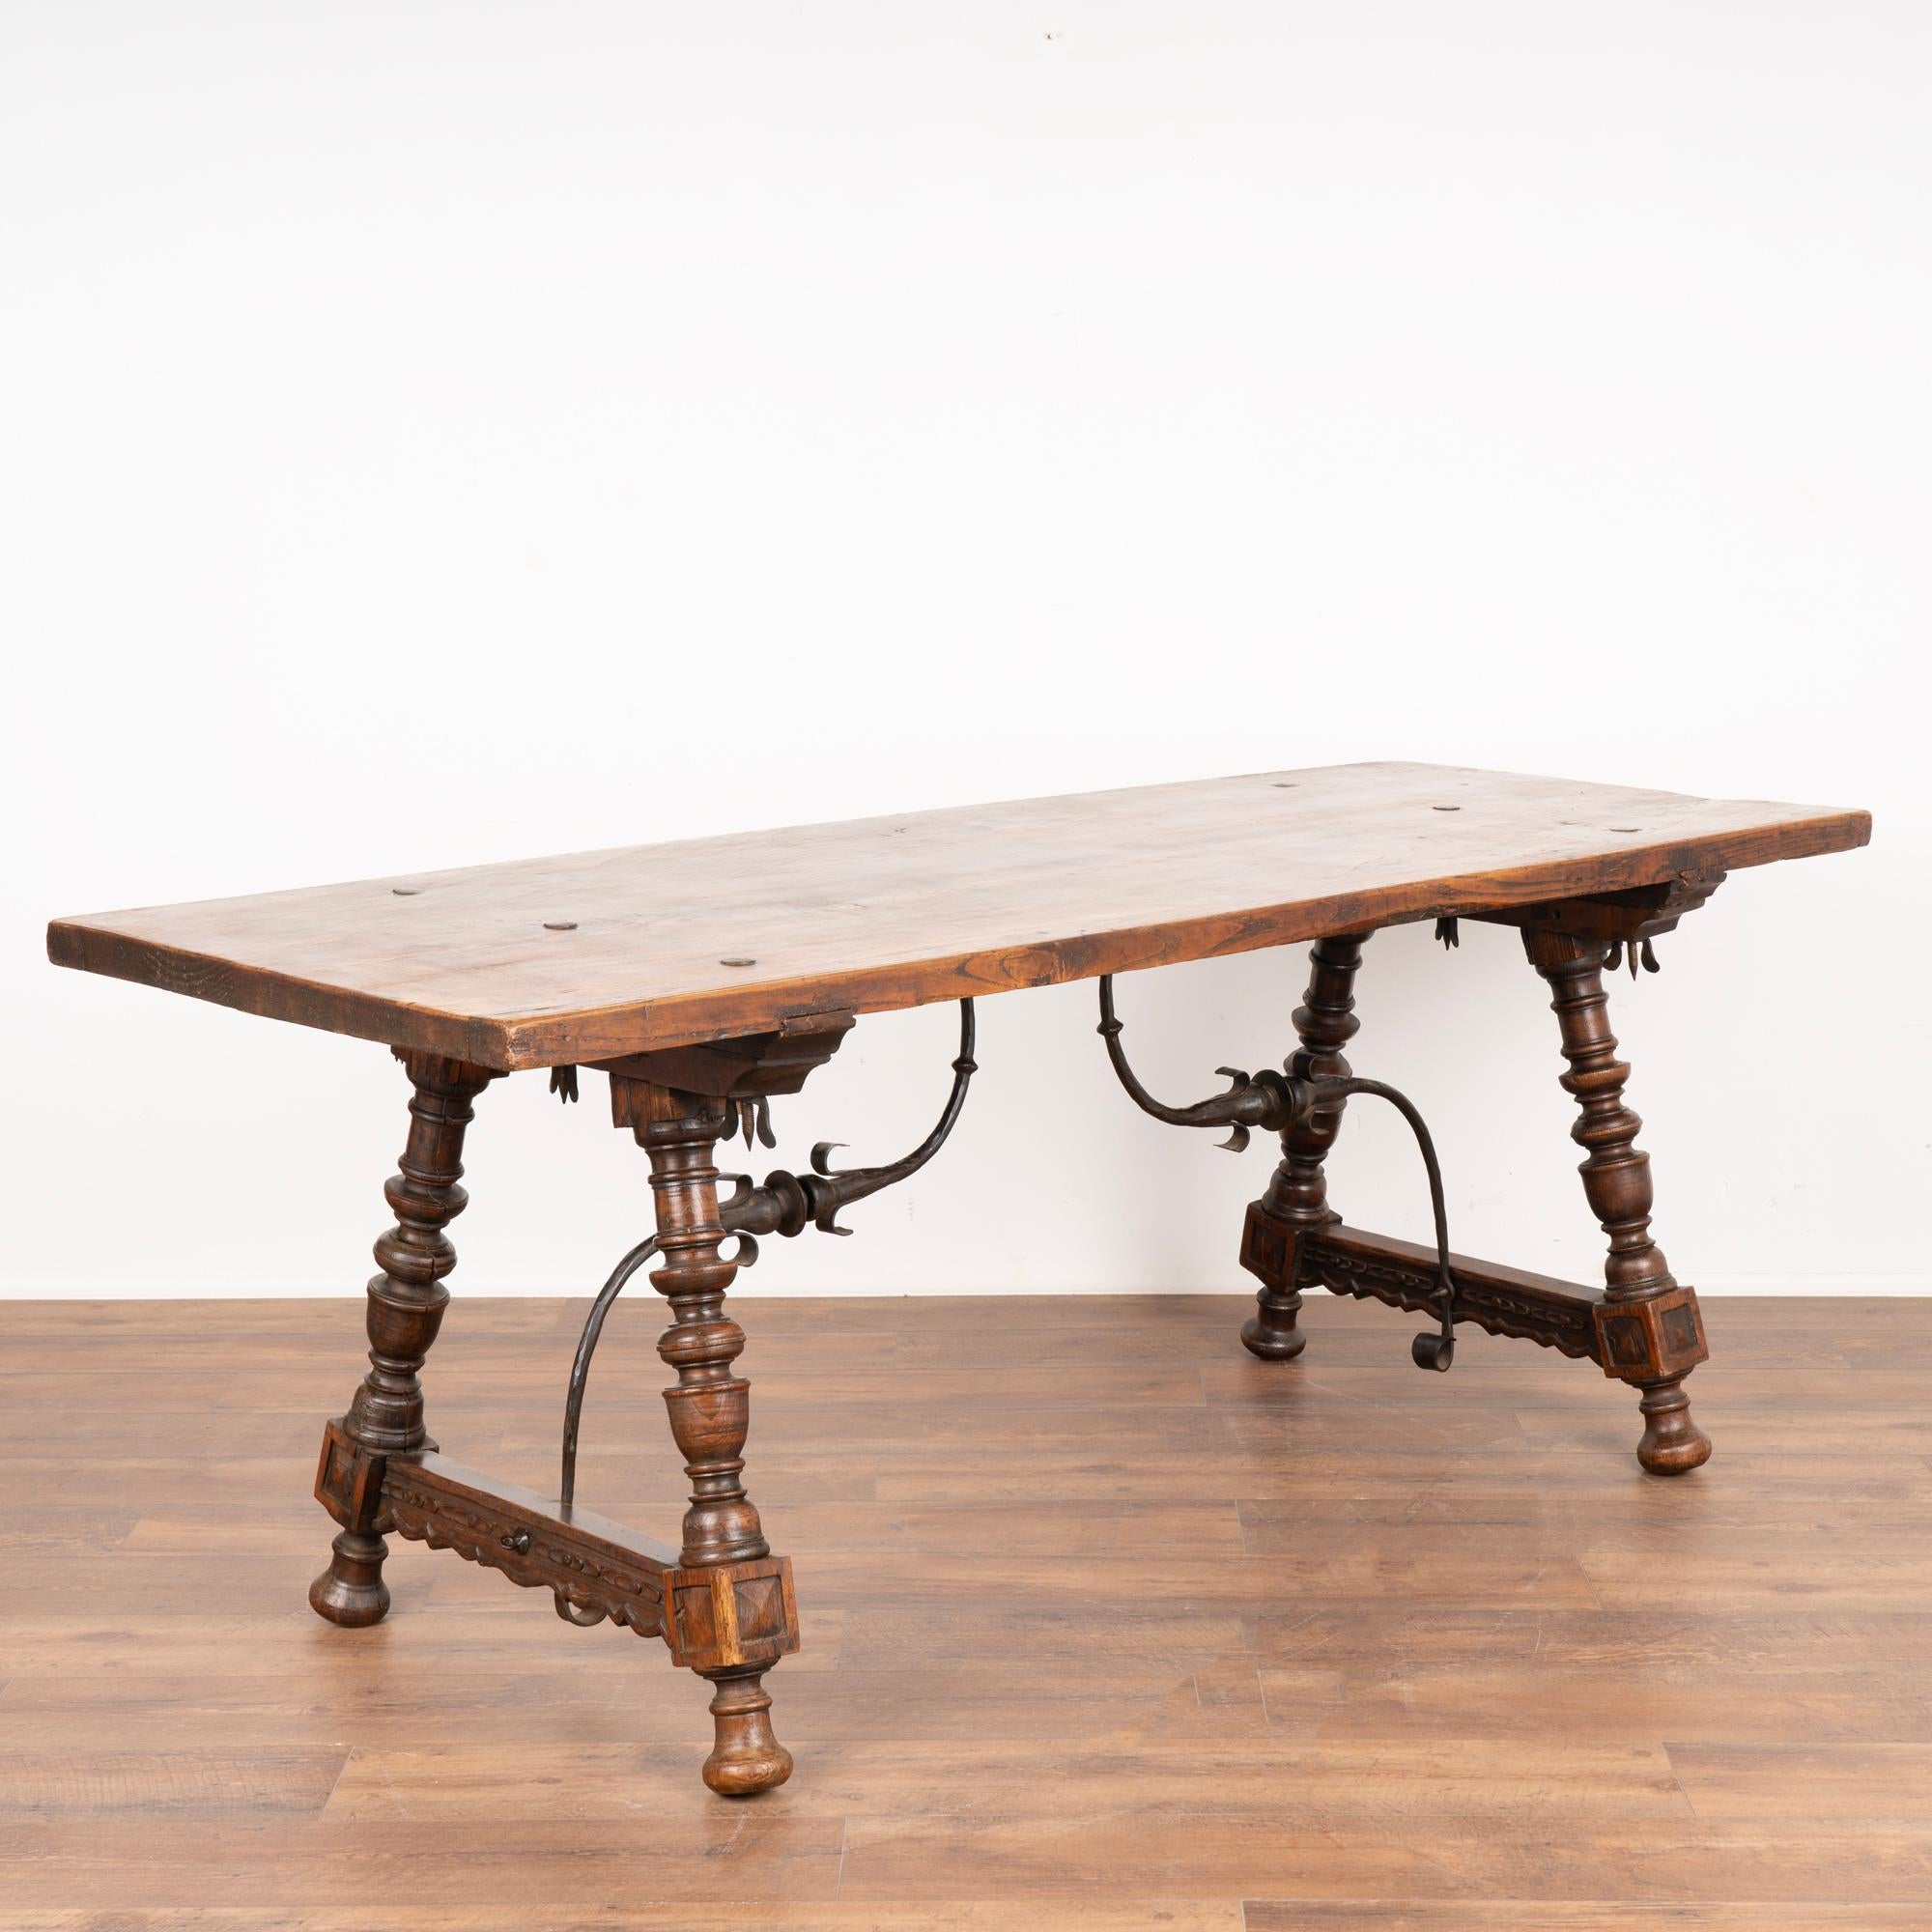 6.5' Oak dining table or writing desk from Spain with decorative turned legs and iron scrollwork stretcher.
Rich patina from generations of use.
Restored, strong and stable.
Please refer to professional photos to clearly understand color, finish,